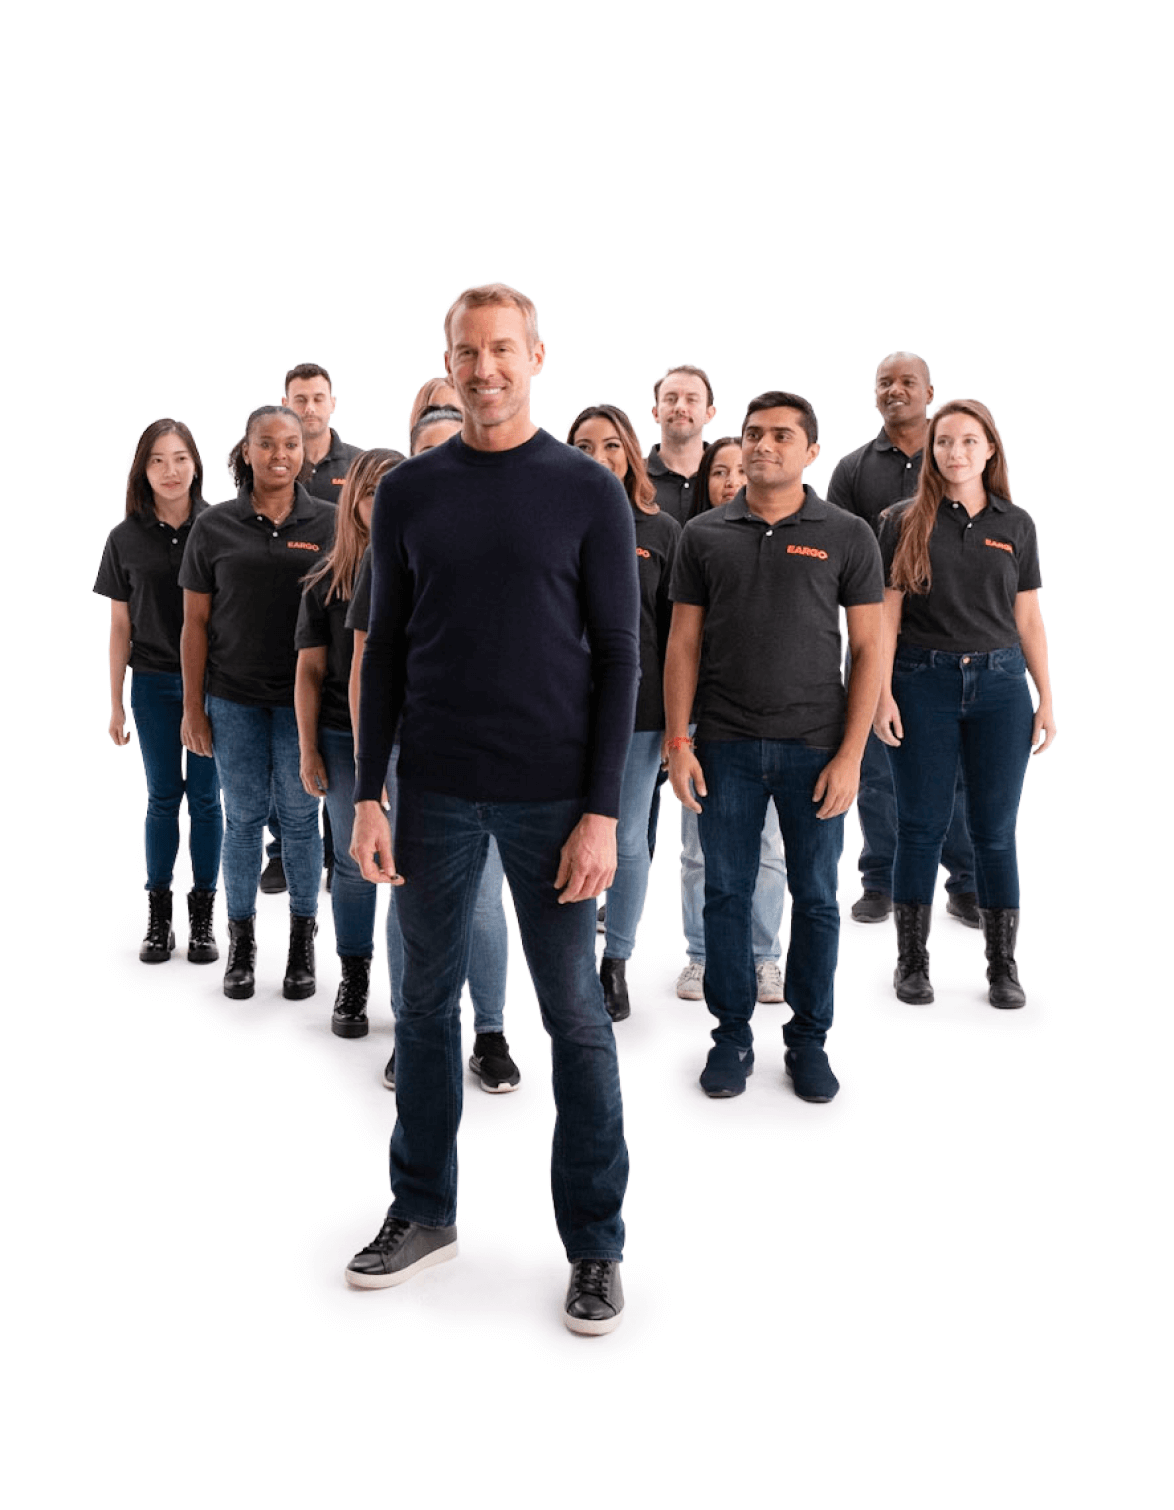 Image of an Eargo user with support professionals behind him on his journey to better hearing